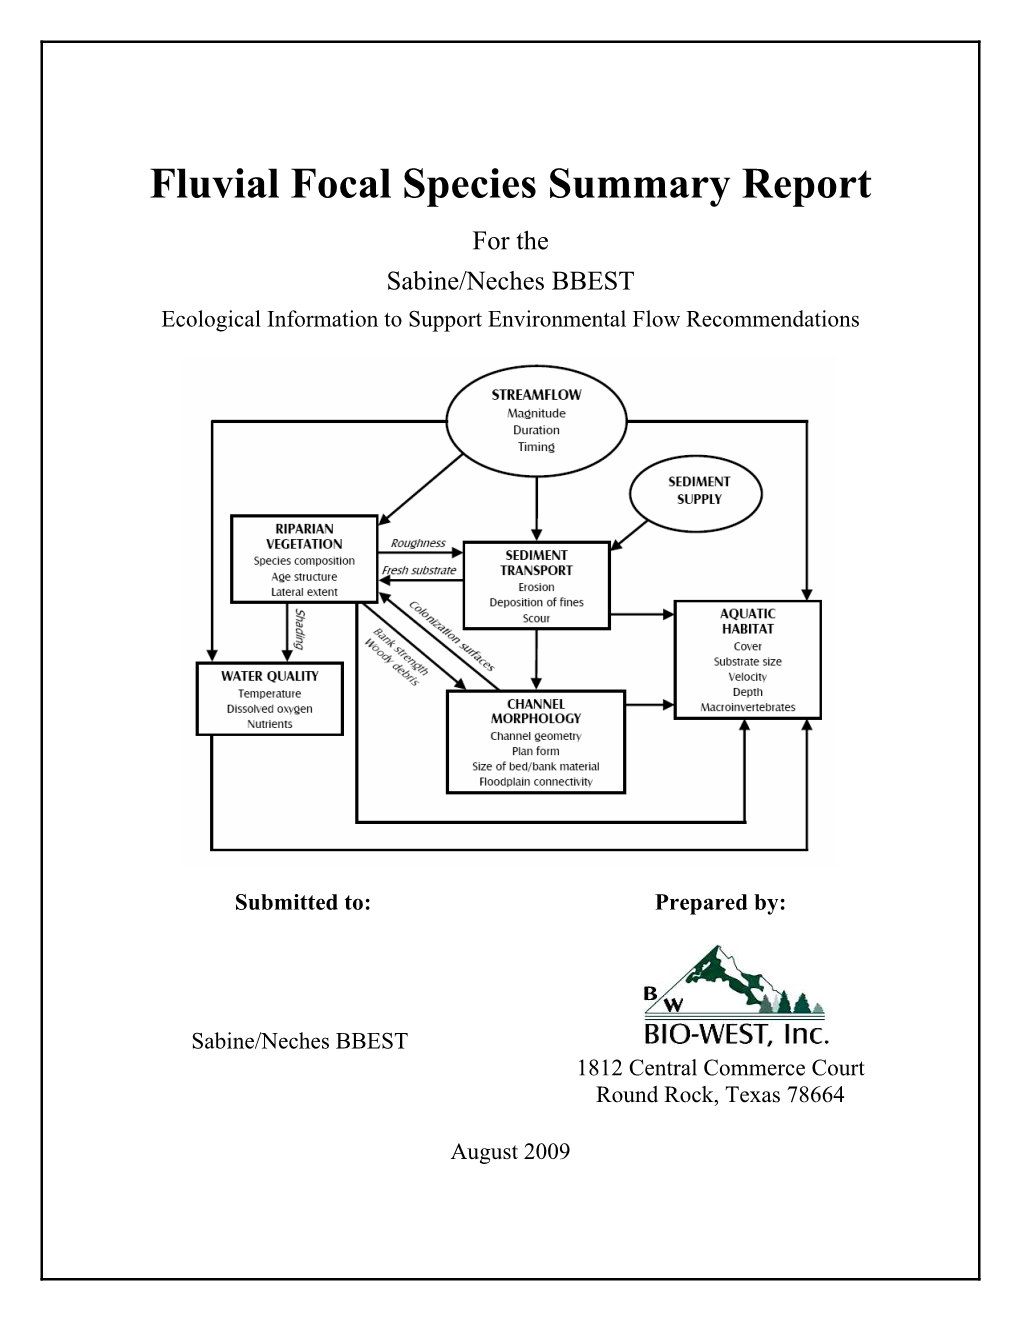 Fluvial Focal Species Summary Report for the Sabine/Neches BBEST Ecological Information to Support Environmental Flow Recommendations